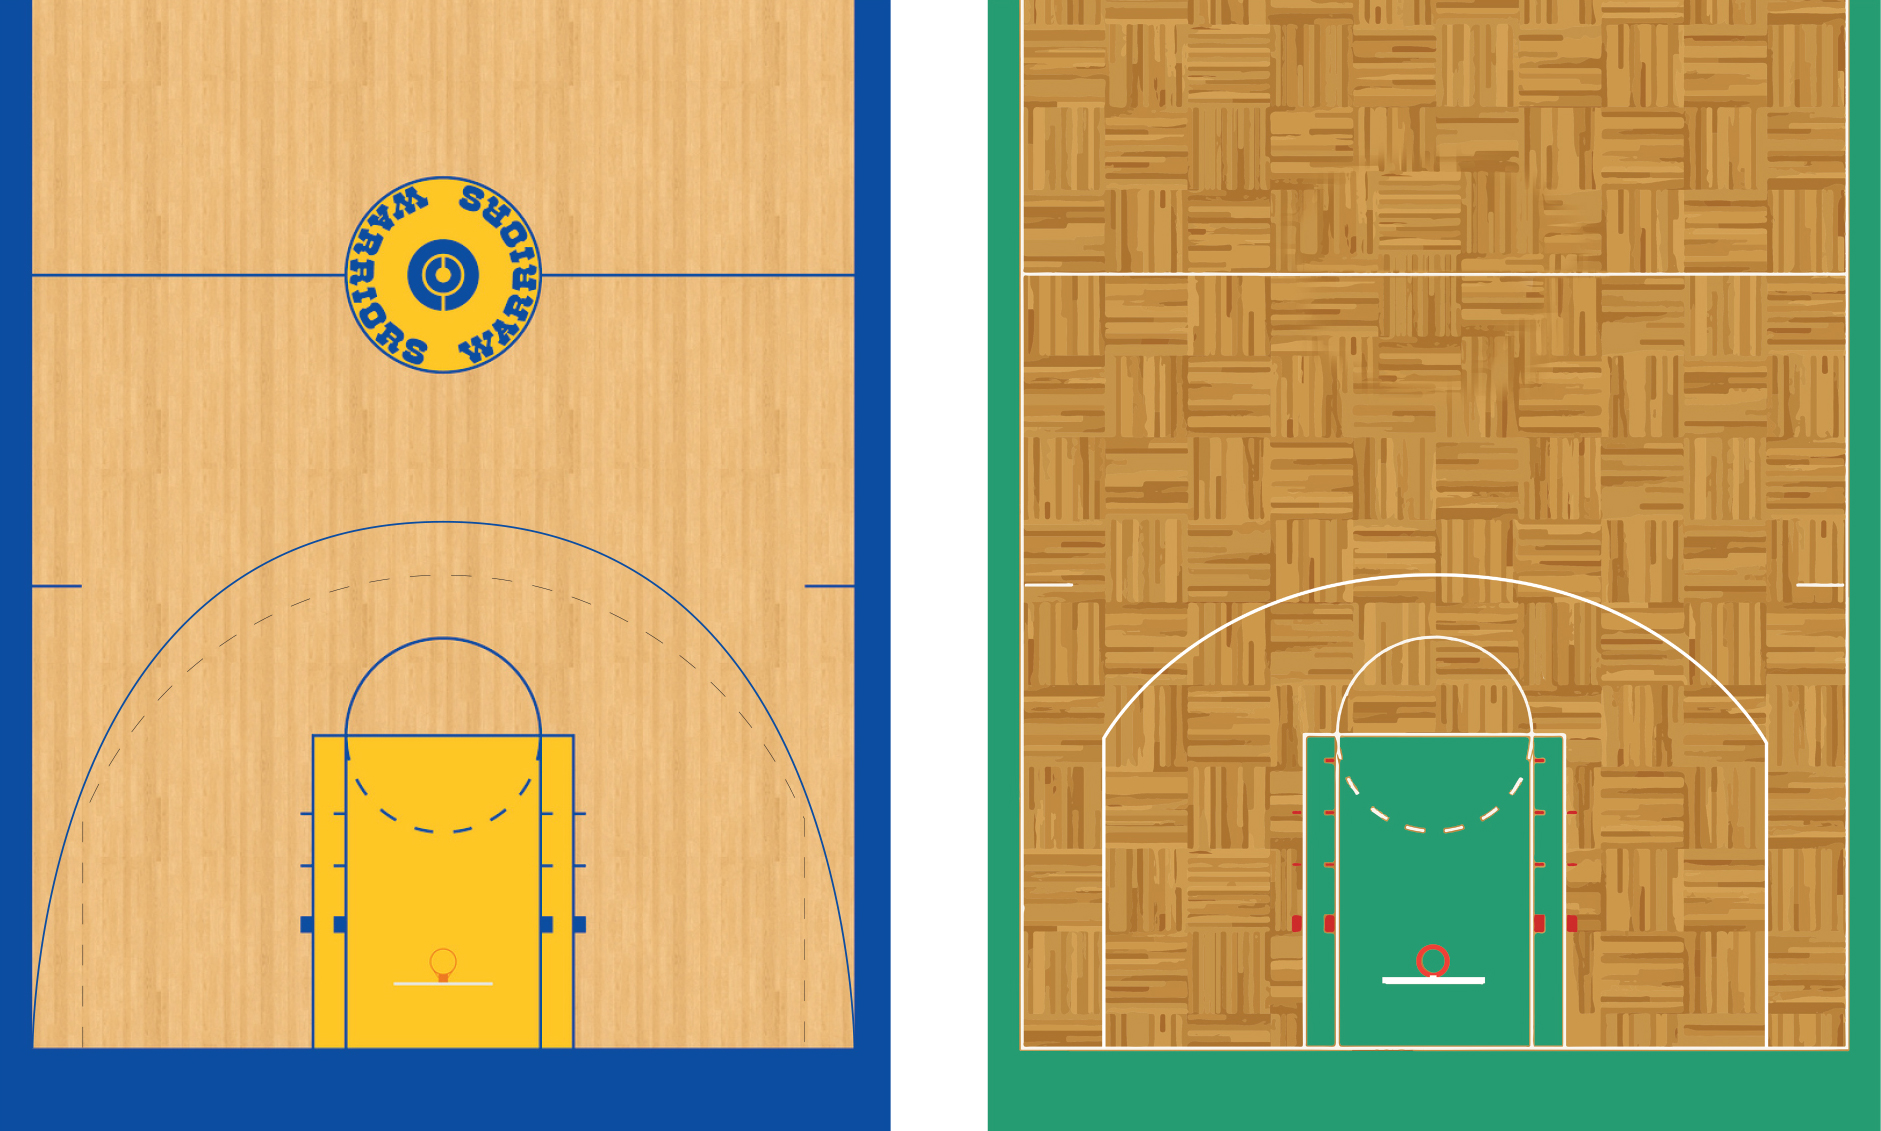 NBA's 3-point revolution: How 1 shot is changing the game